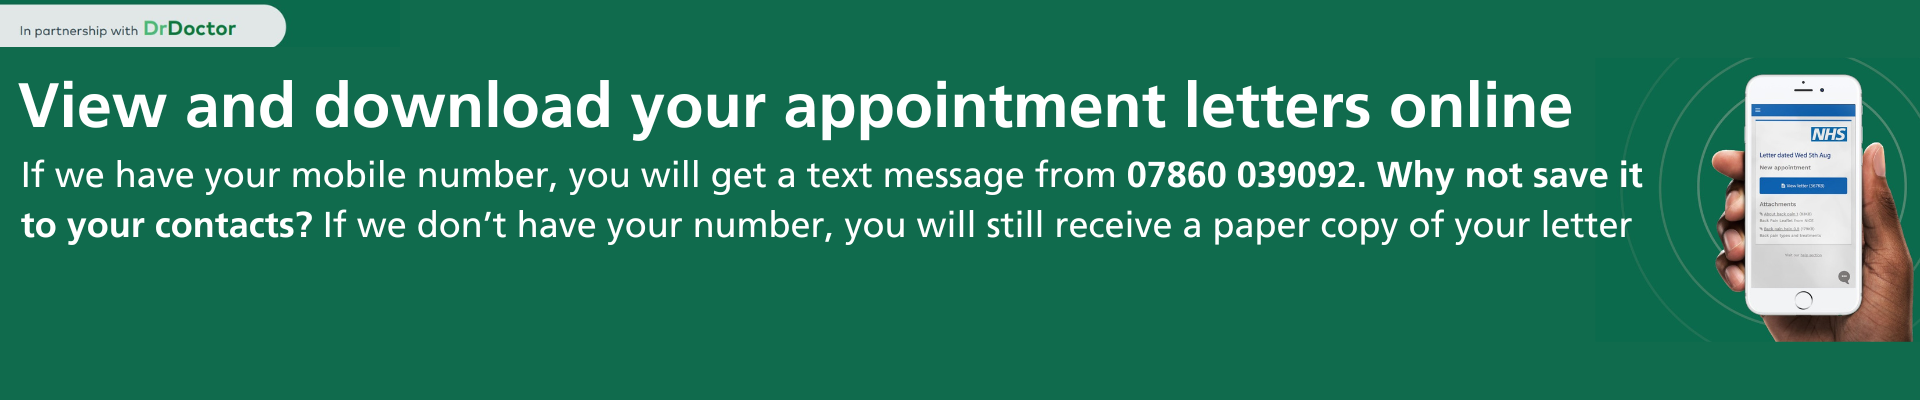 Image of a hand holding a mobile phone with an NHS appointment letter notification. If you or a loved one receives a text from 07860 039092, it is a genuine number and contains details of the appointment and any extra information